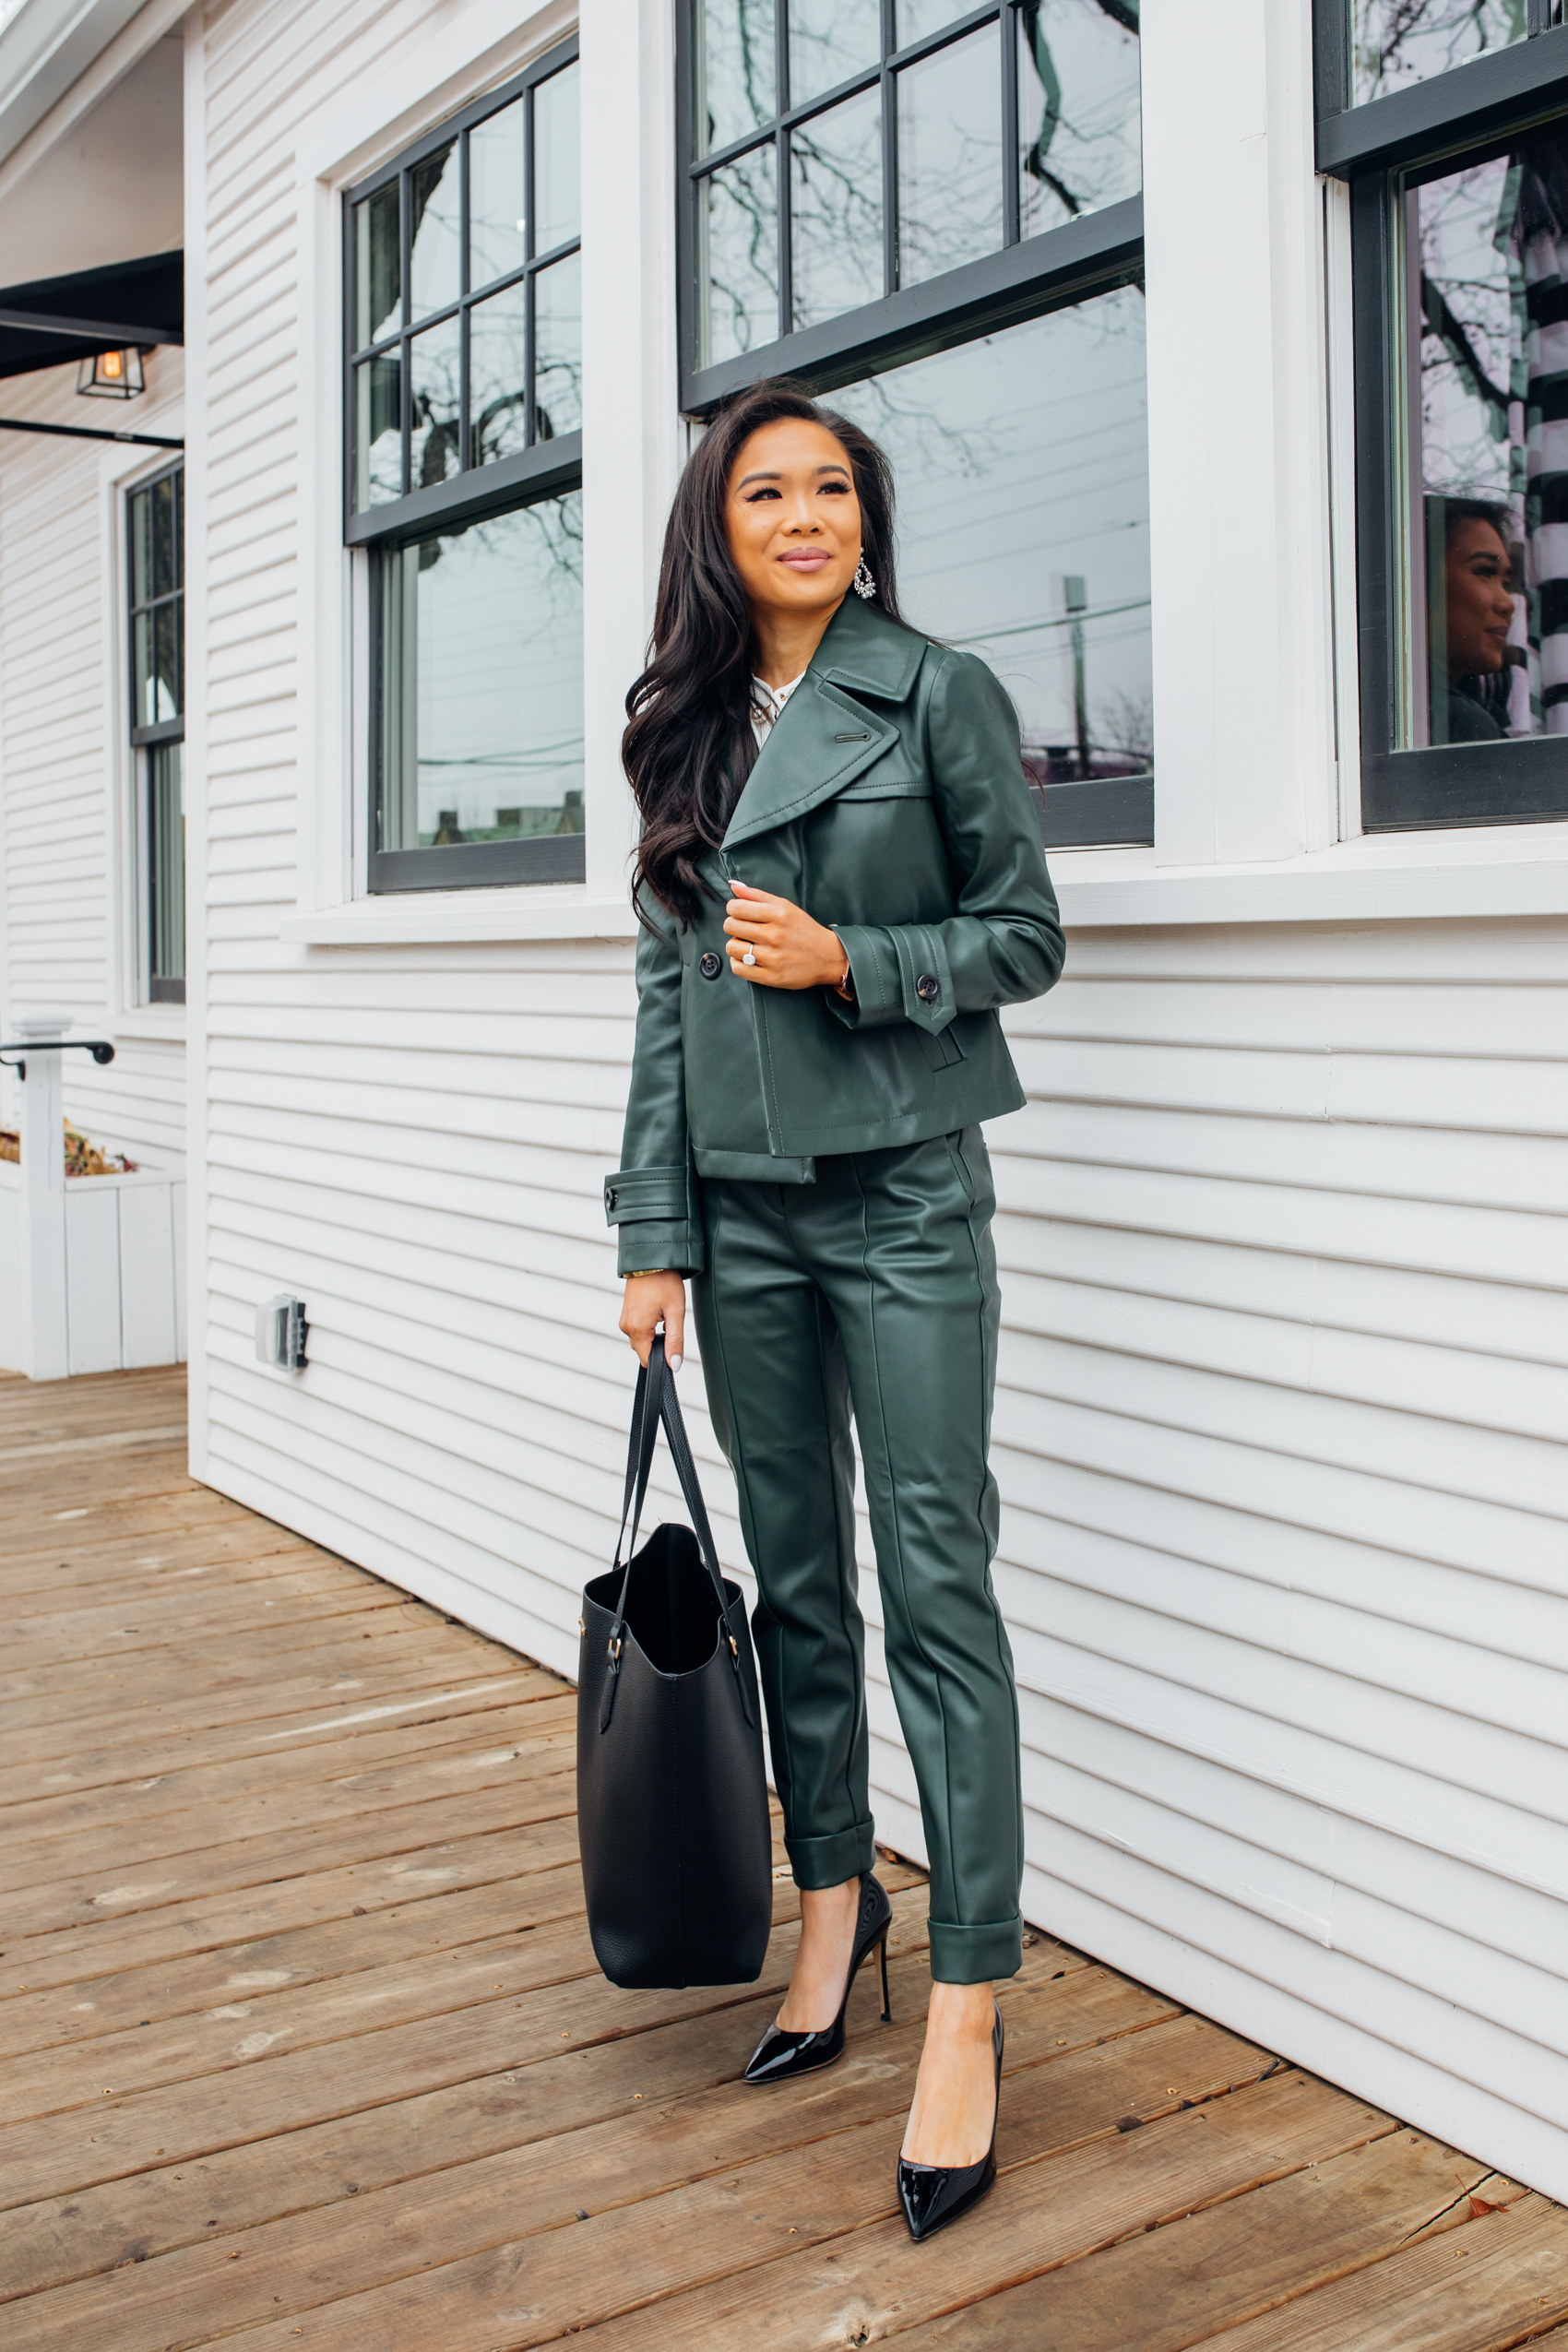 How To Make A Leather Jacket Work Appropriate - Color & Chic